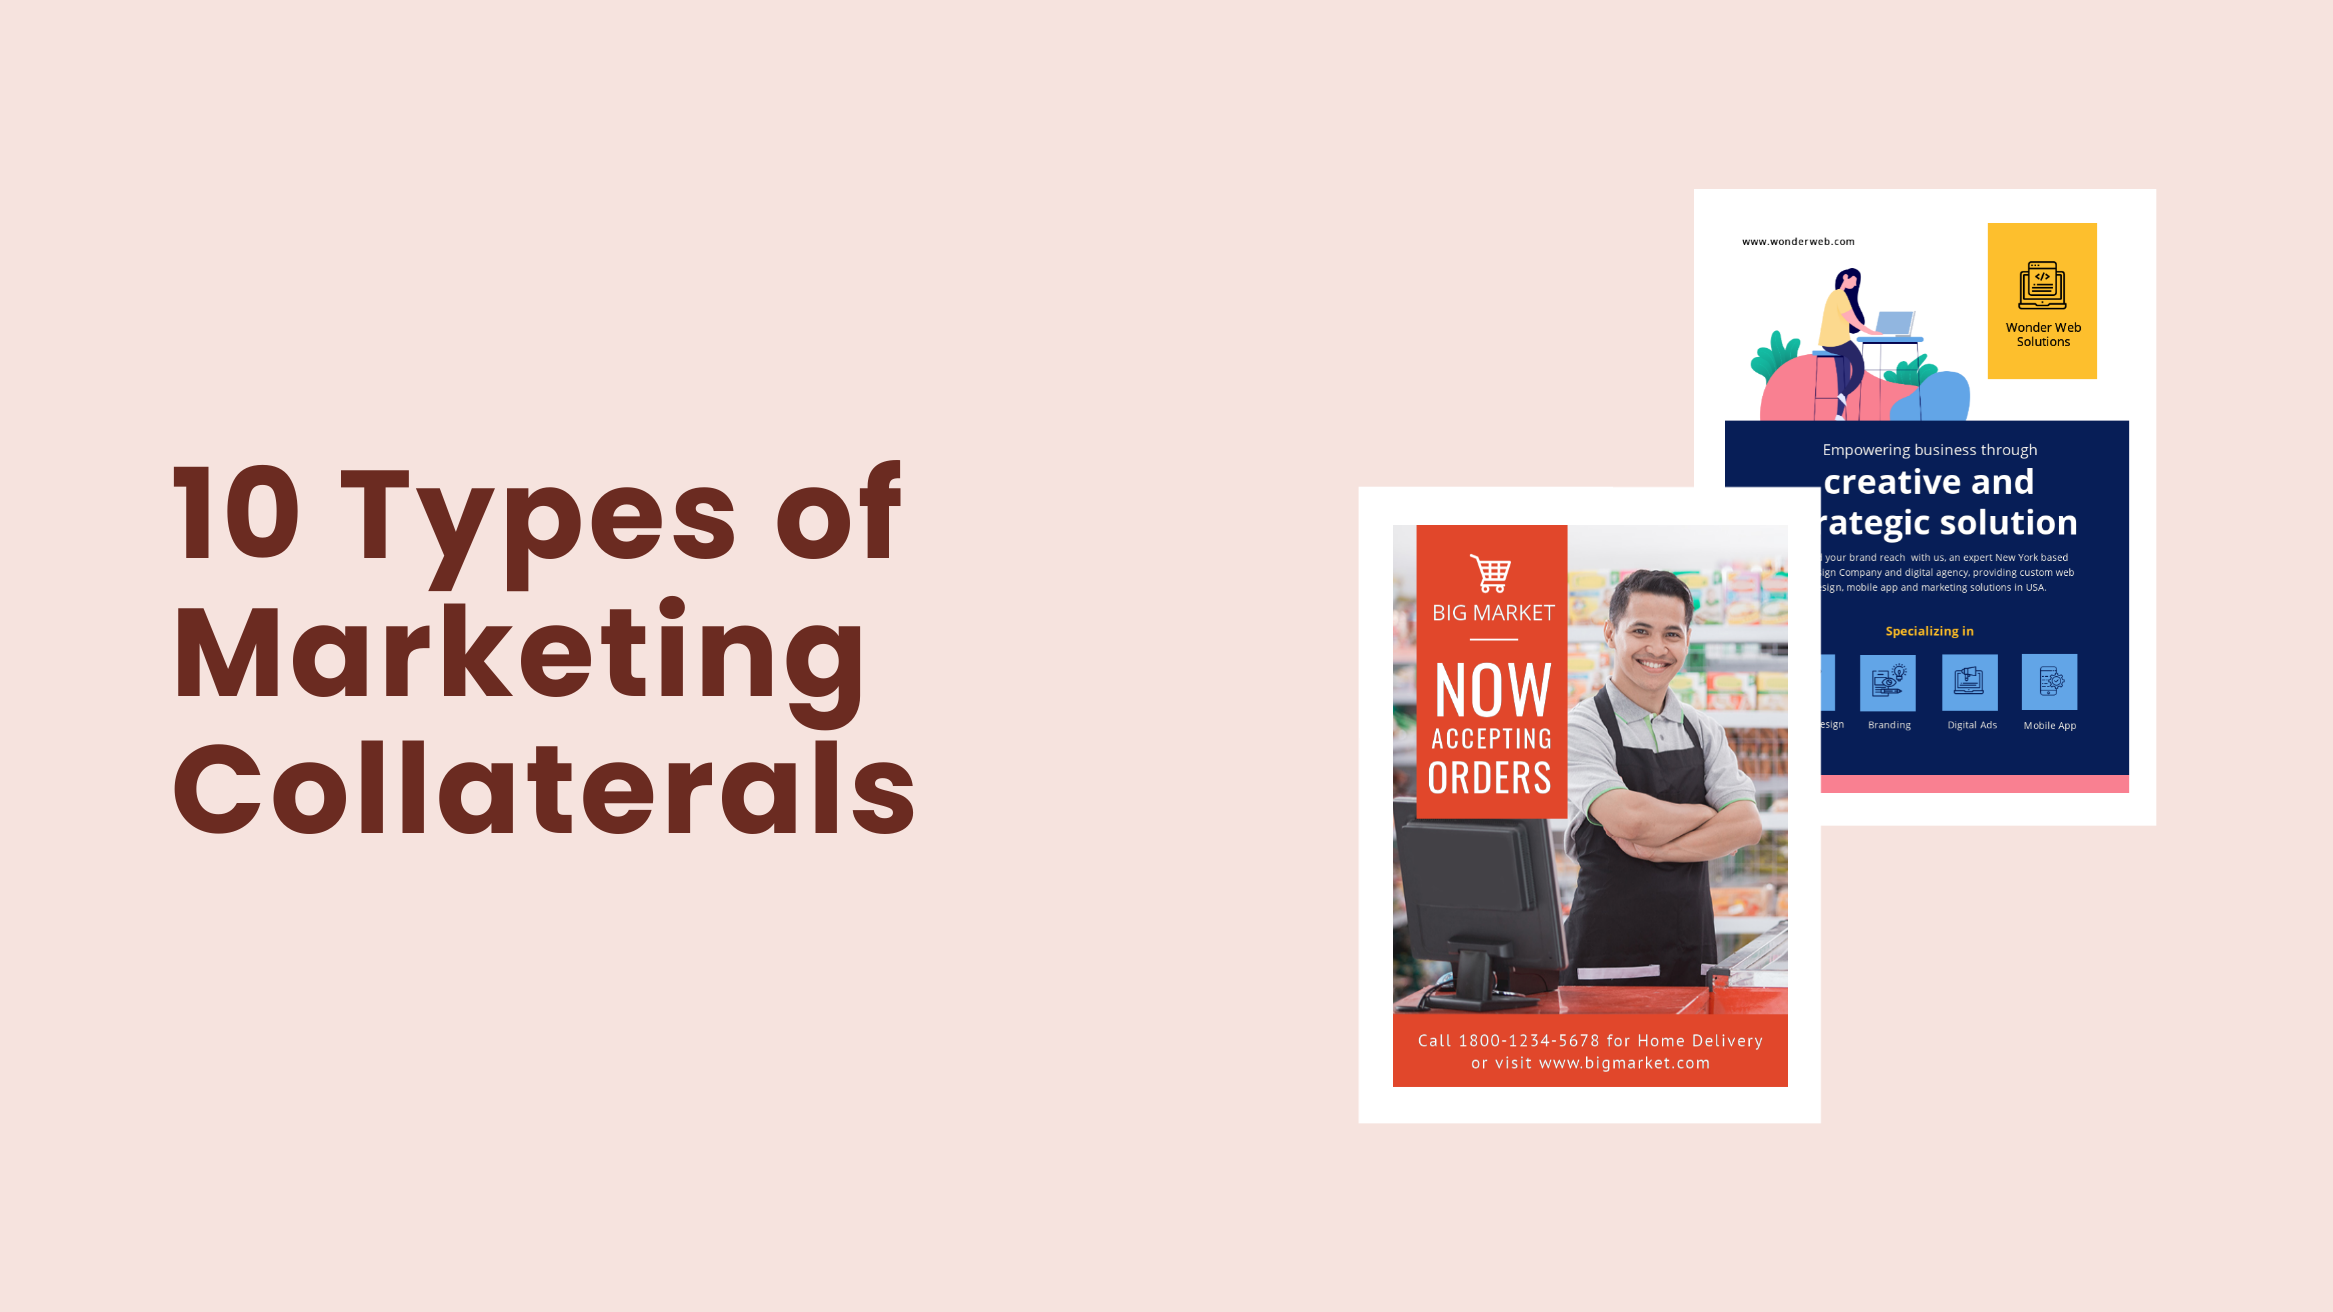 10 Types of Marketing Collaterals